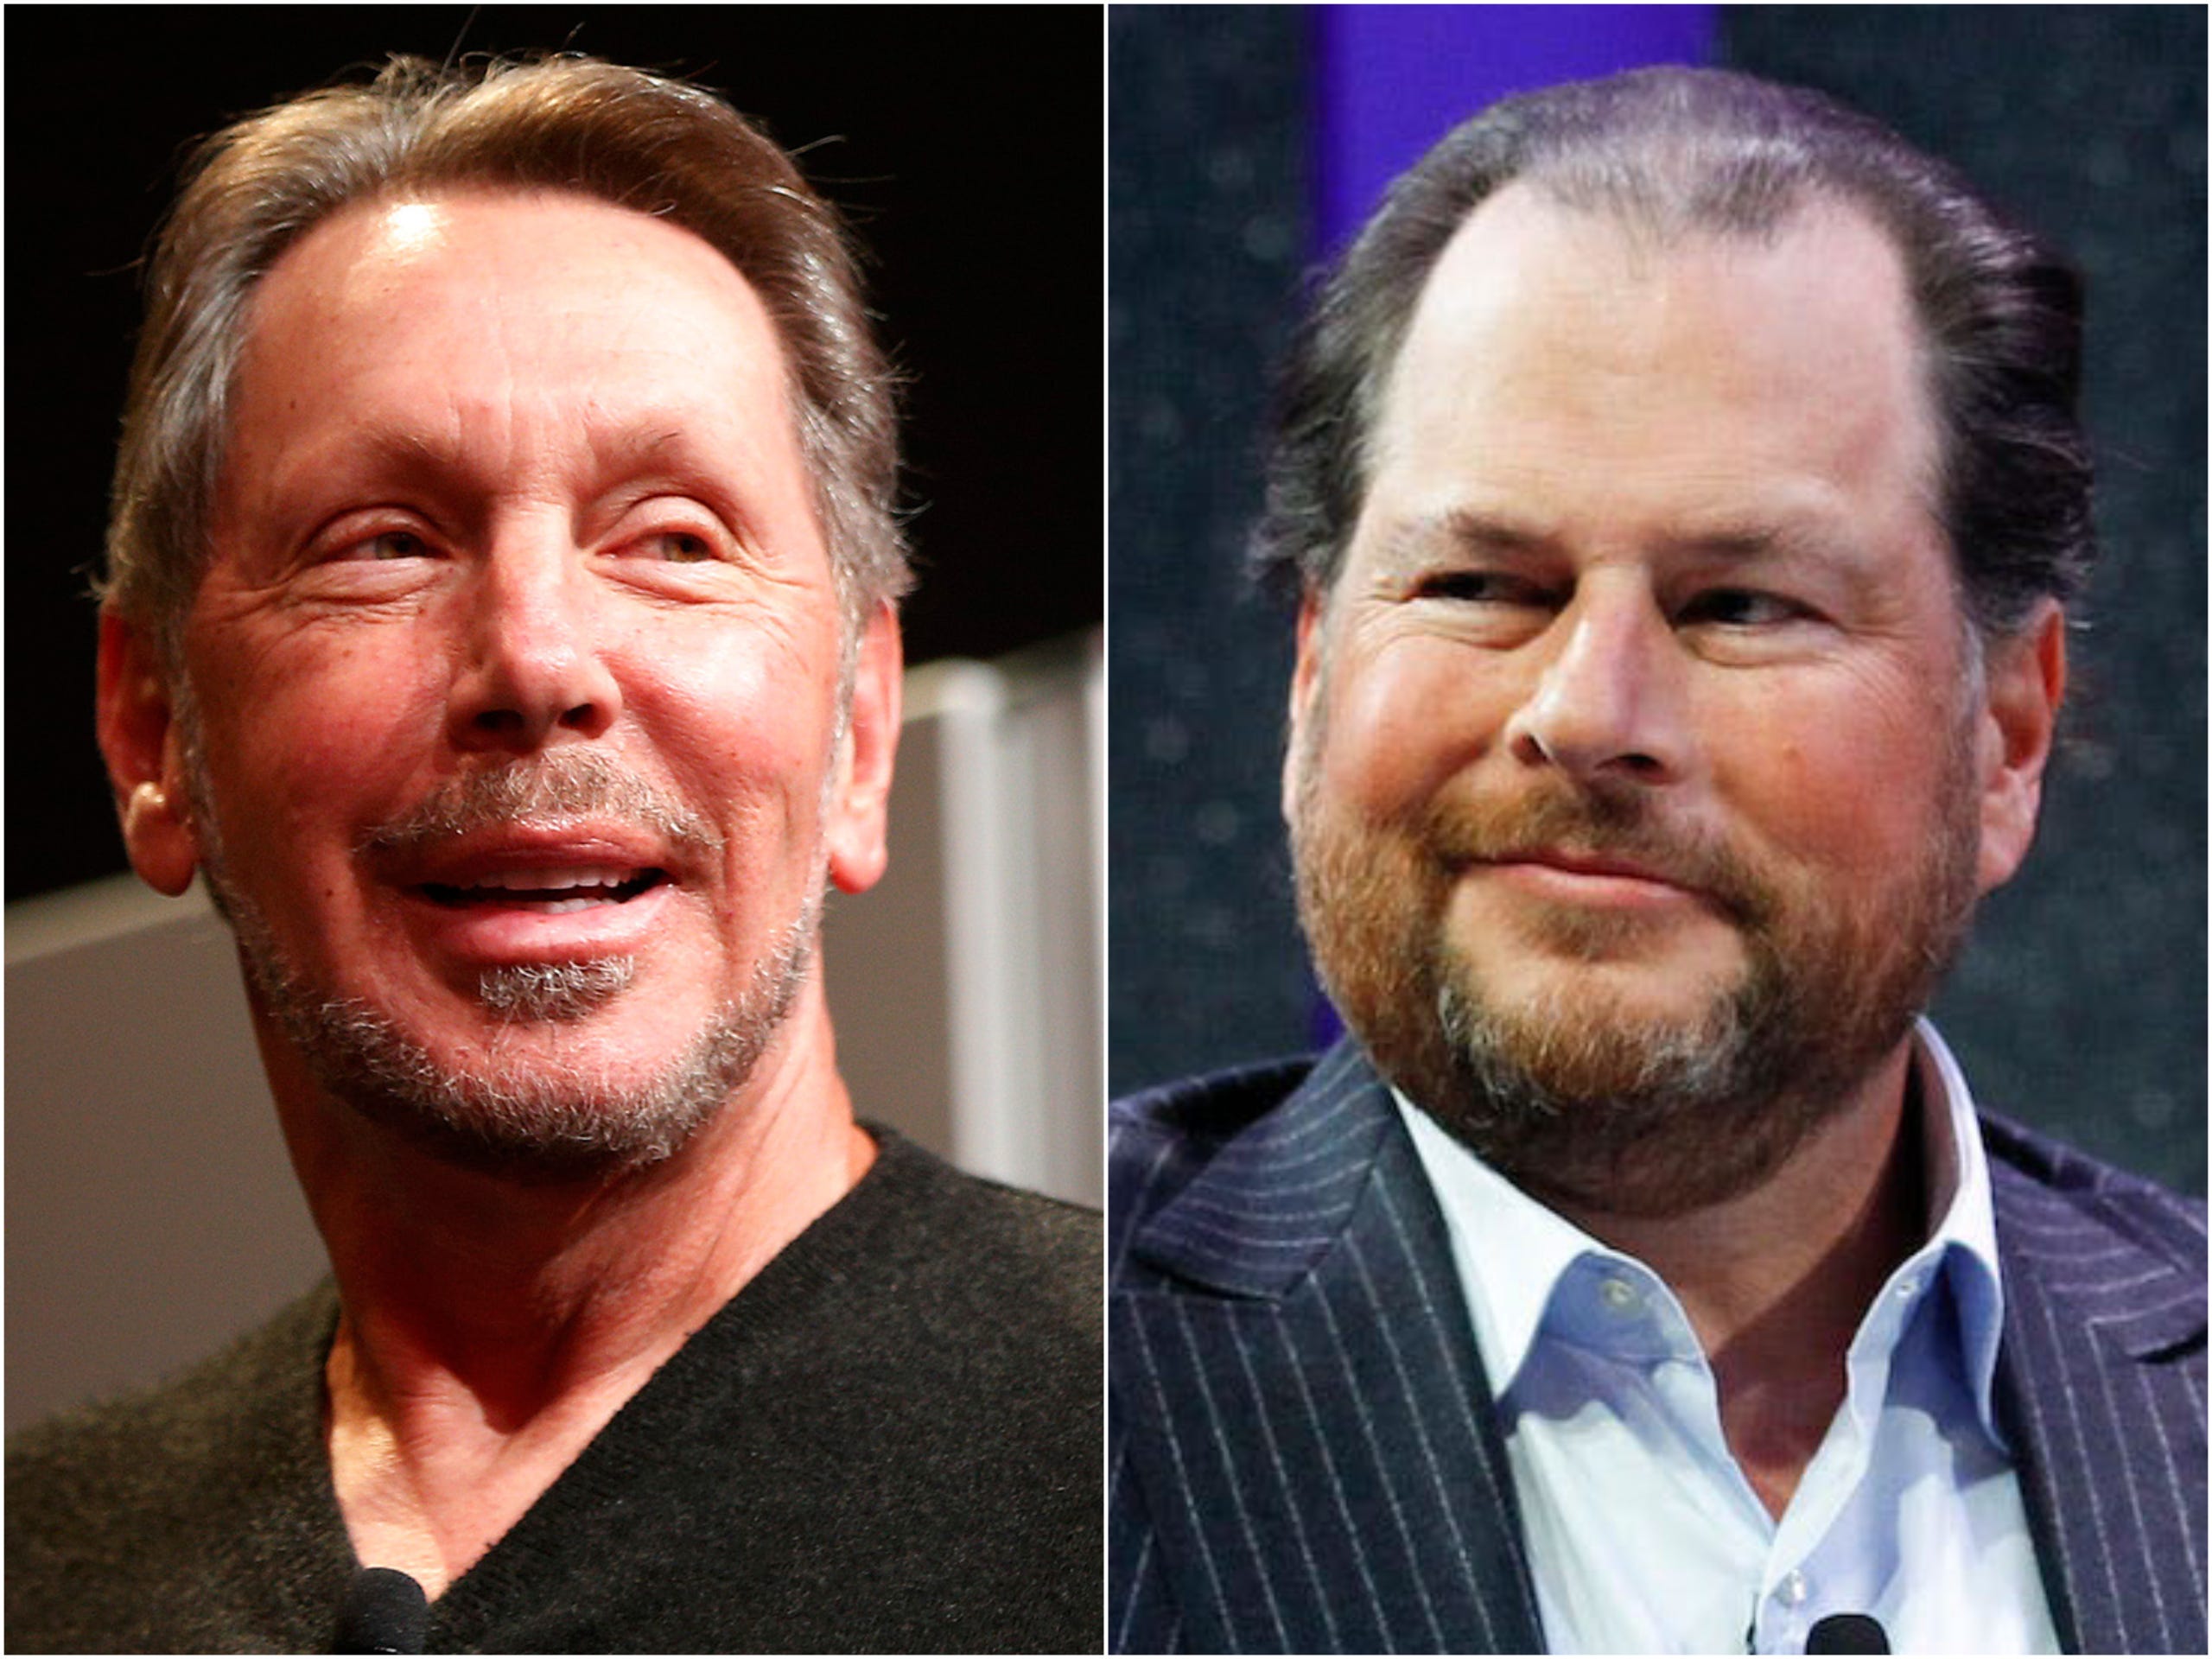 <p>In 1999, <a href="https://www.businessinsider.com/marc-benioff-loves-larry-ellison-2016-9">Ellison's protégé, Marc Benioff</a>, left Oracle to work on a new startup called Salesforce.com. Ellison was an early investor, putting $2 million into his friend's new venture.</p><p>When Benioff found out that Ellison had Oracle working on a direct competitor to Salesforce's product, he tried to force his mentor to quit Salesforce's board. Instead, Ellison forced Benioff to fire him — meaning Ellison kept his shares in Salesforce.</p><p>Given that Salesforce is now a $267 billion company, Ellison personally profits even when his competitors do well. It has led to a love-hate relationship between the two executives that continues to this day, with the two taking shots at each other in the press.</p>